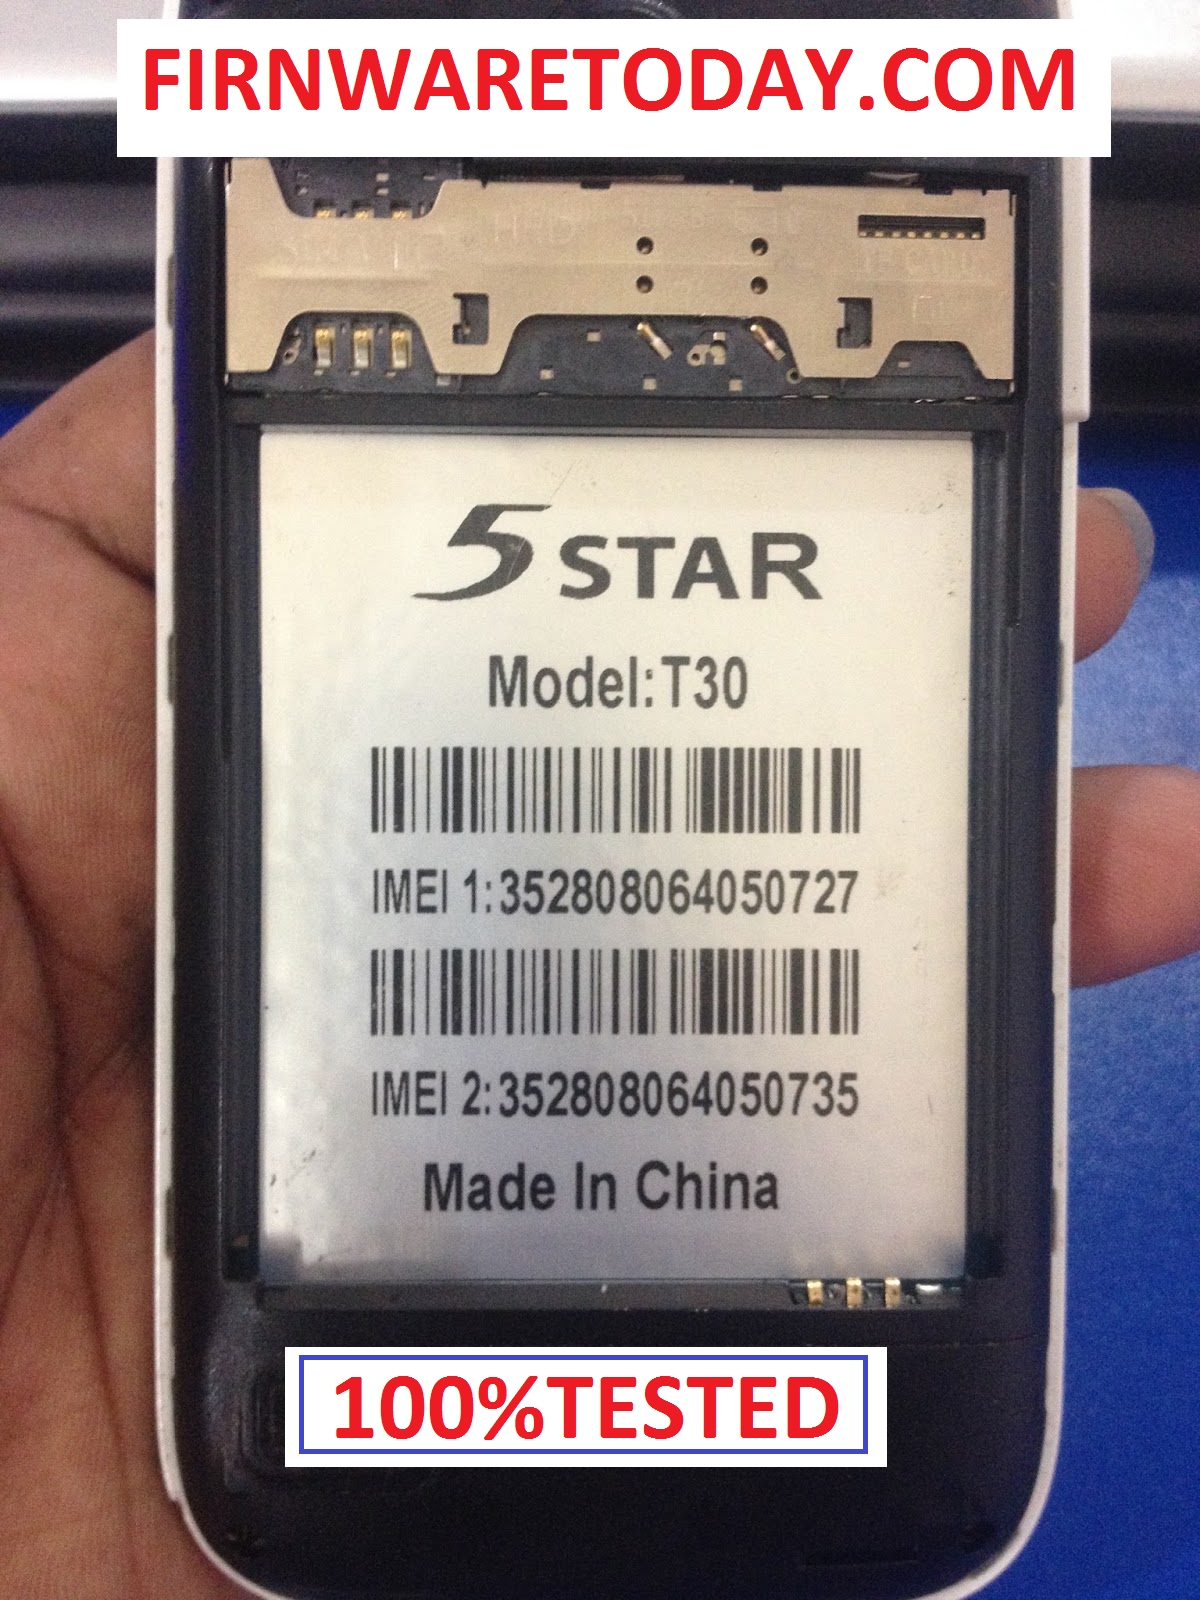 5STAR T30 FLASH FILE FREE WHITH OUT PASS UPDATE (MT6572) 1000% TESTED BY FIRMWARETODAY.COM